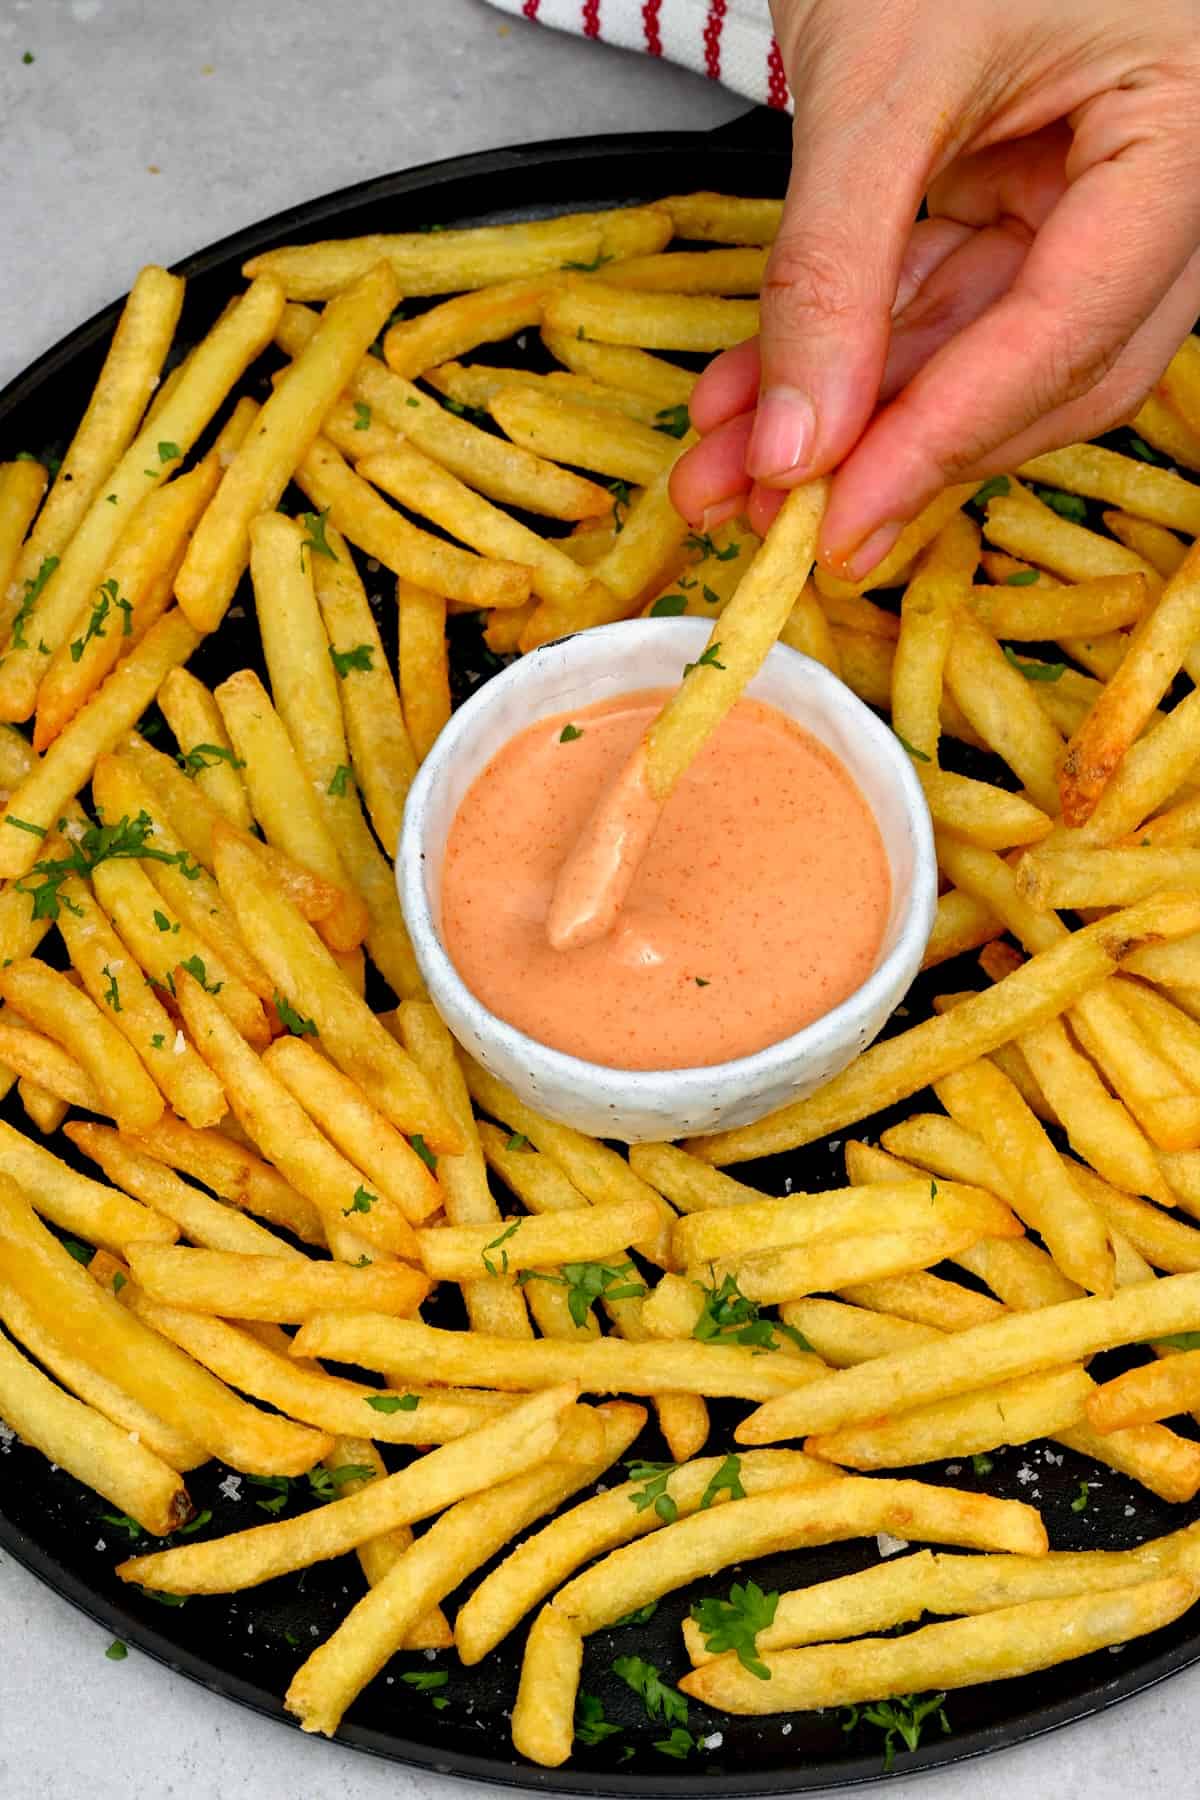 Dipping air fried french fry in dipping sauce